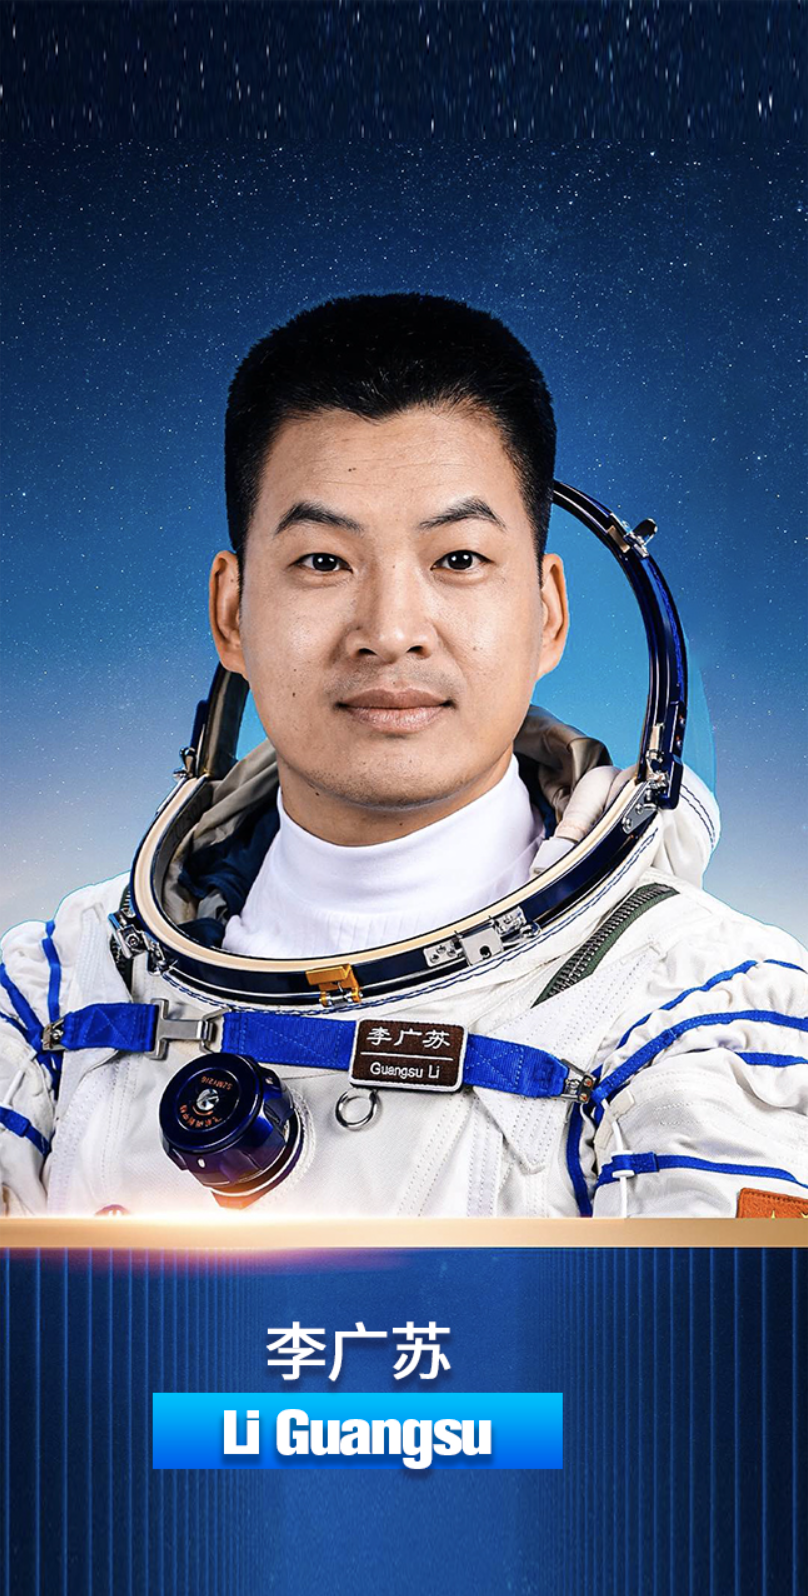 China unveils Shenzhou-18 crew for space station mission